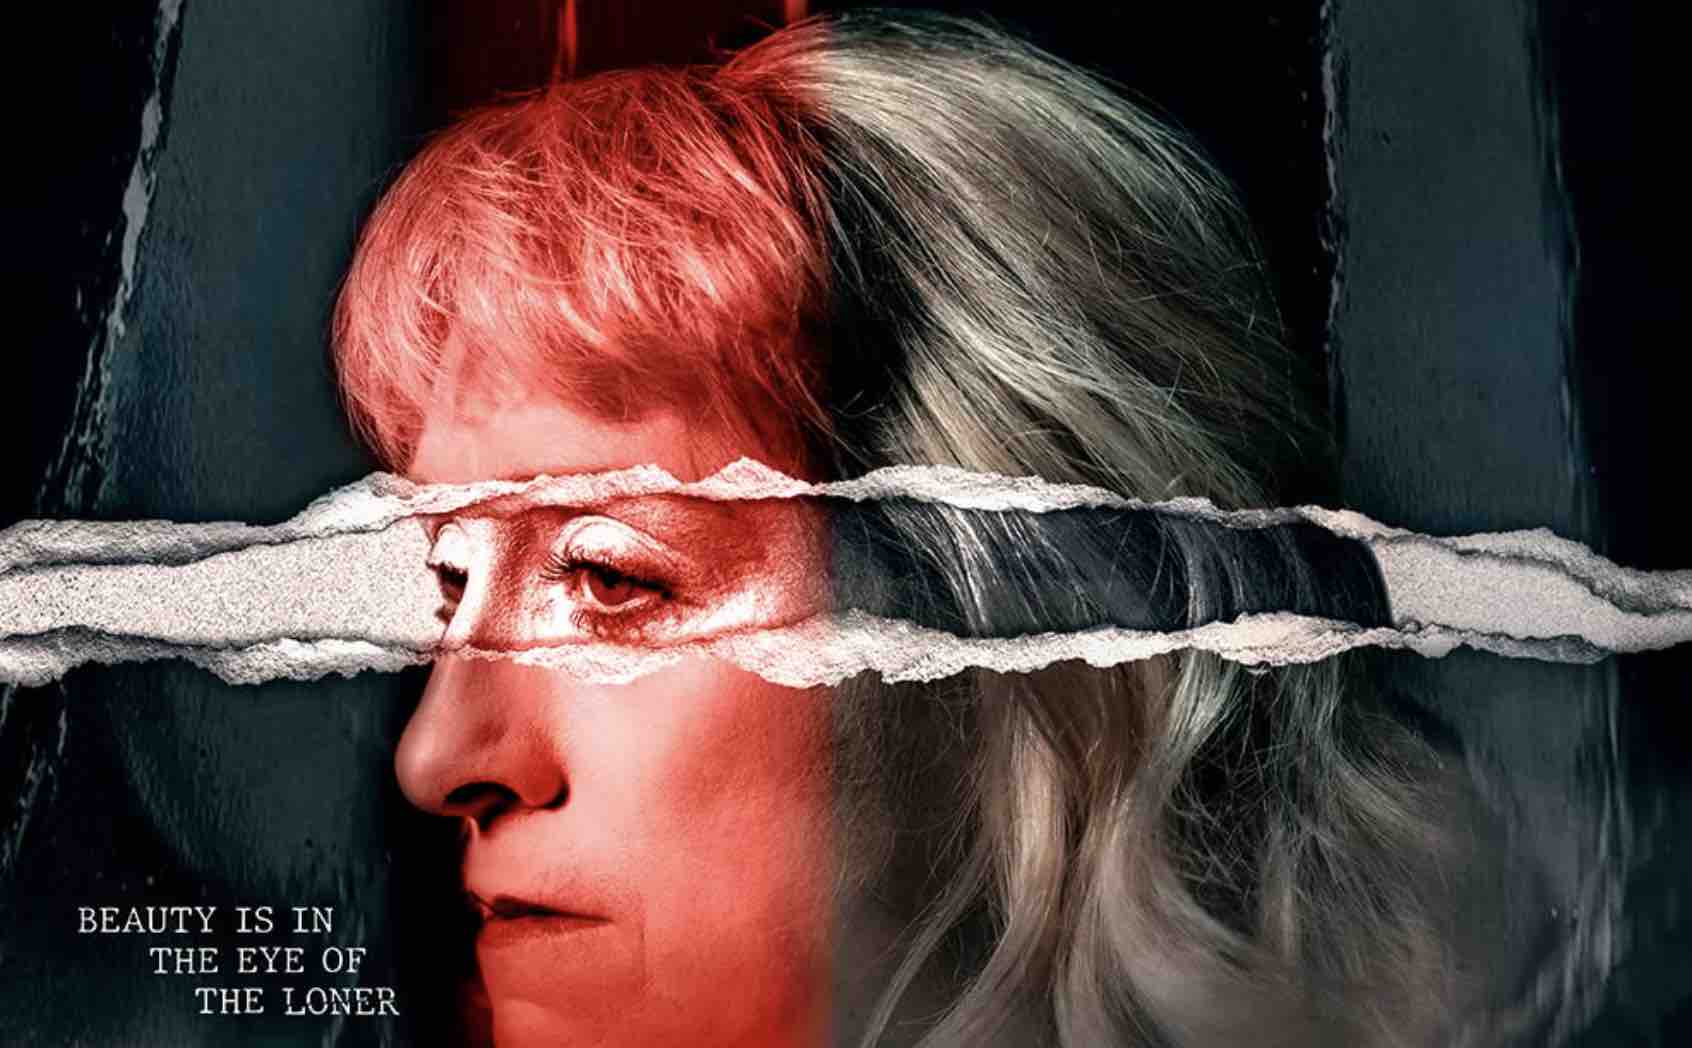 IF I CAN'T HAVE YOU... (2022) Reviews of dark comedy thriller now